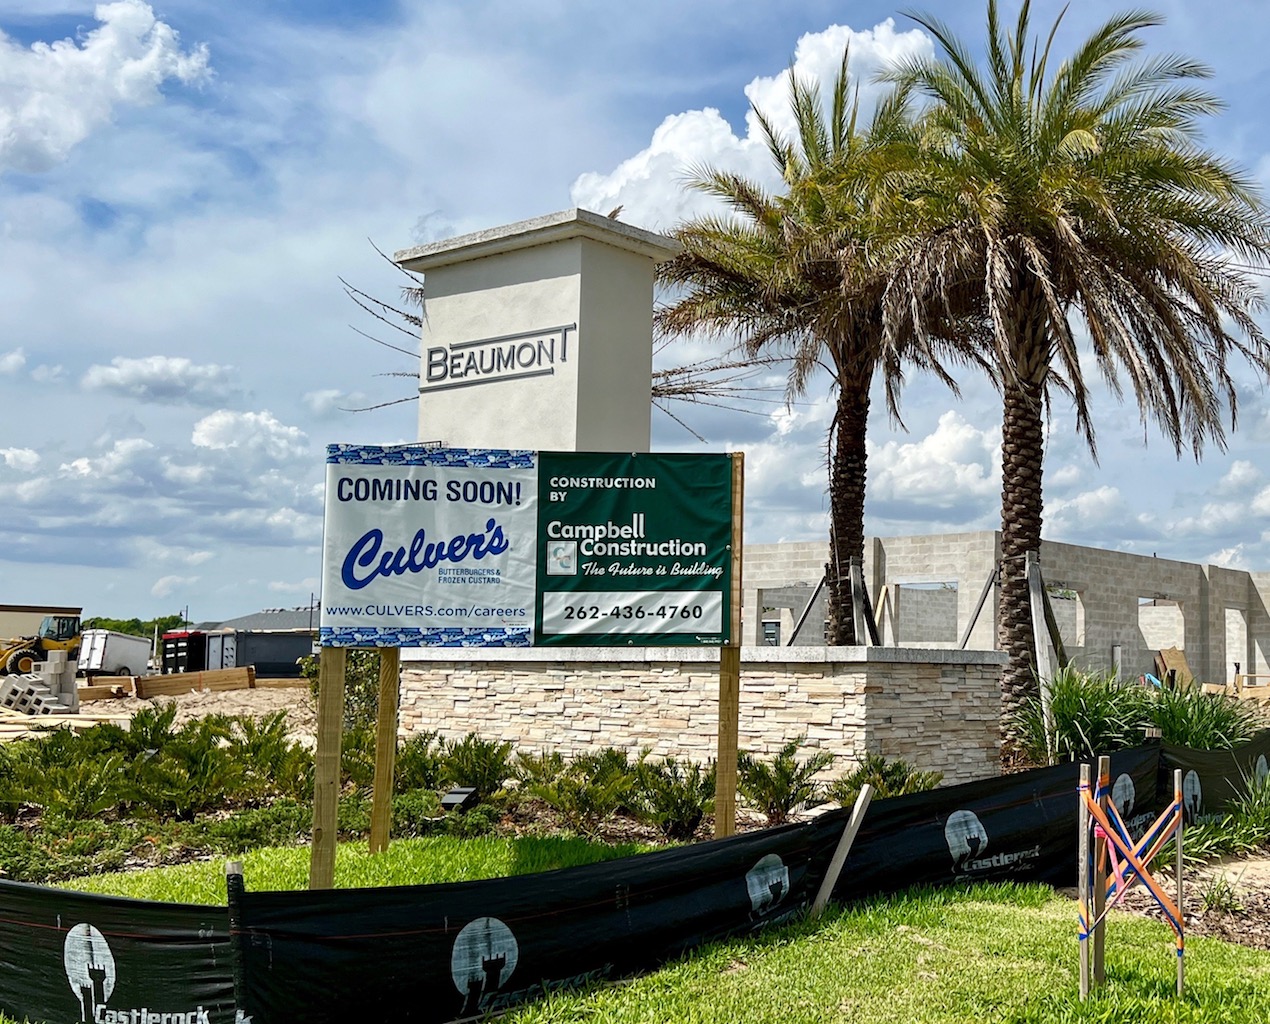 Construction expected to be completed in May on new Culver’s restaurant